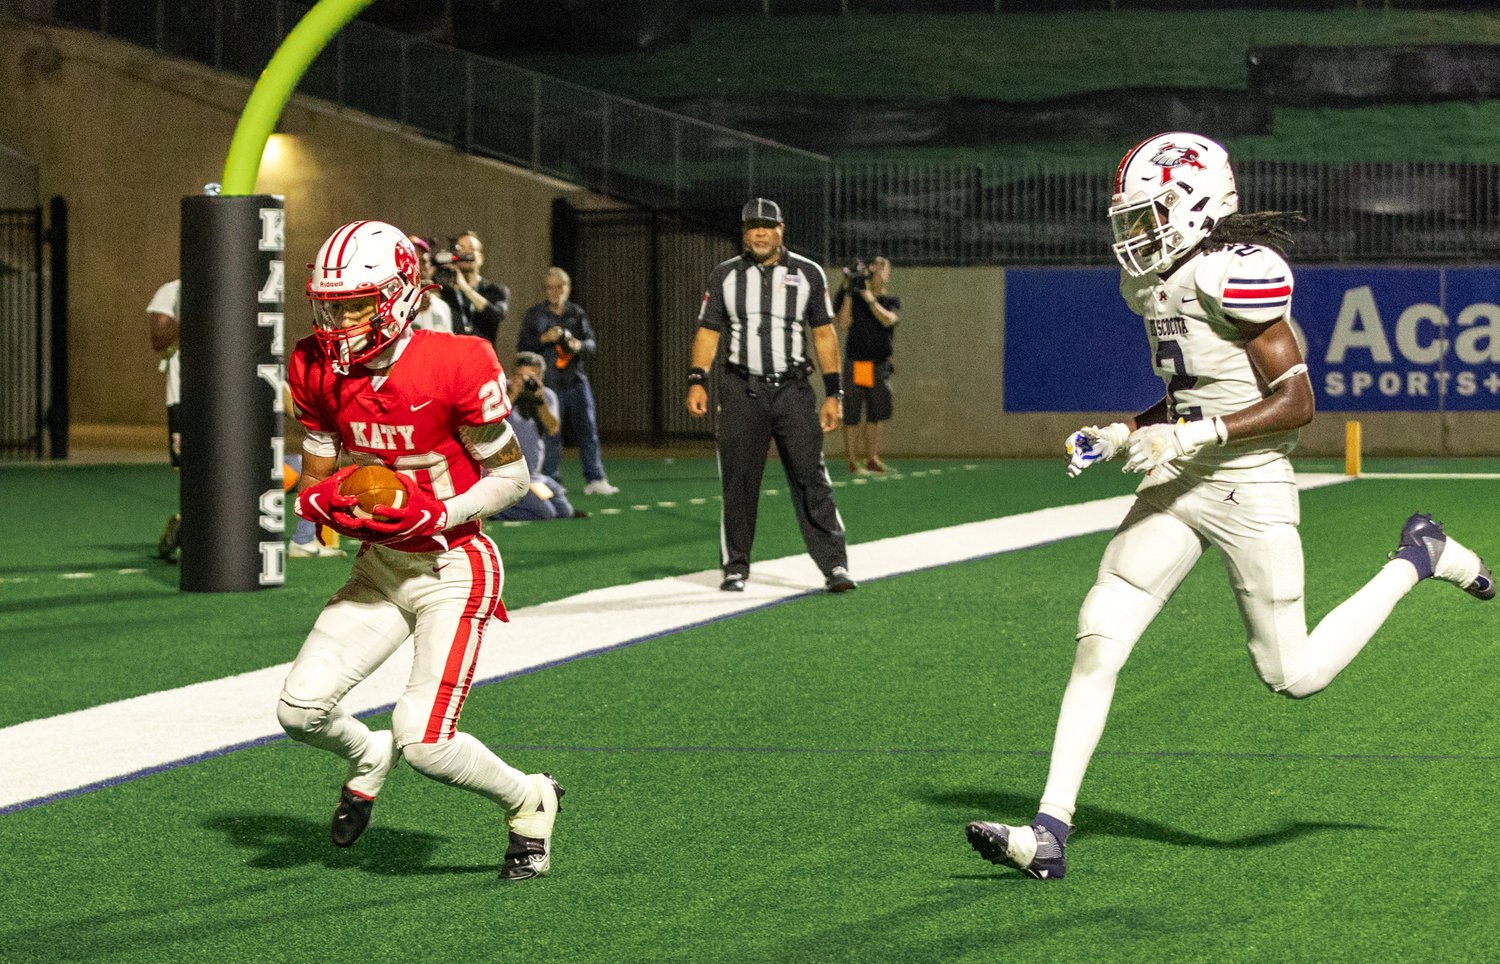 Katy’s Micah Koenig catches a touchdown pass during a game between Katy and Atascocita at Legacy Stadium.